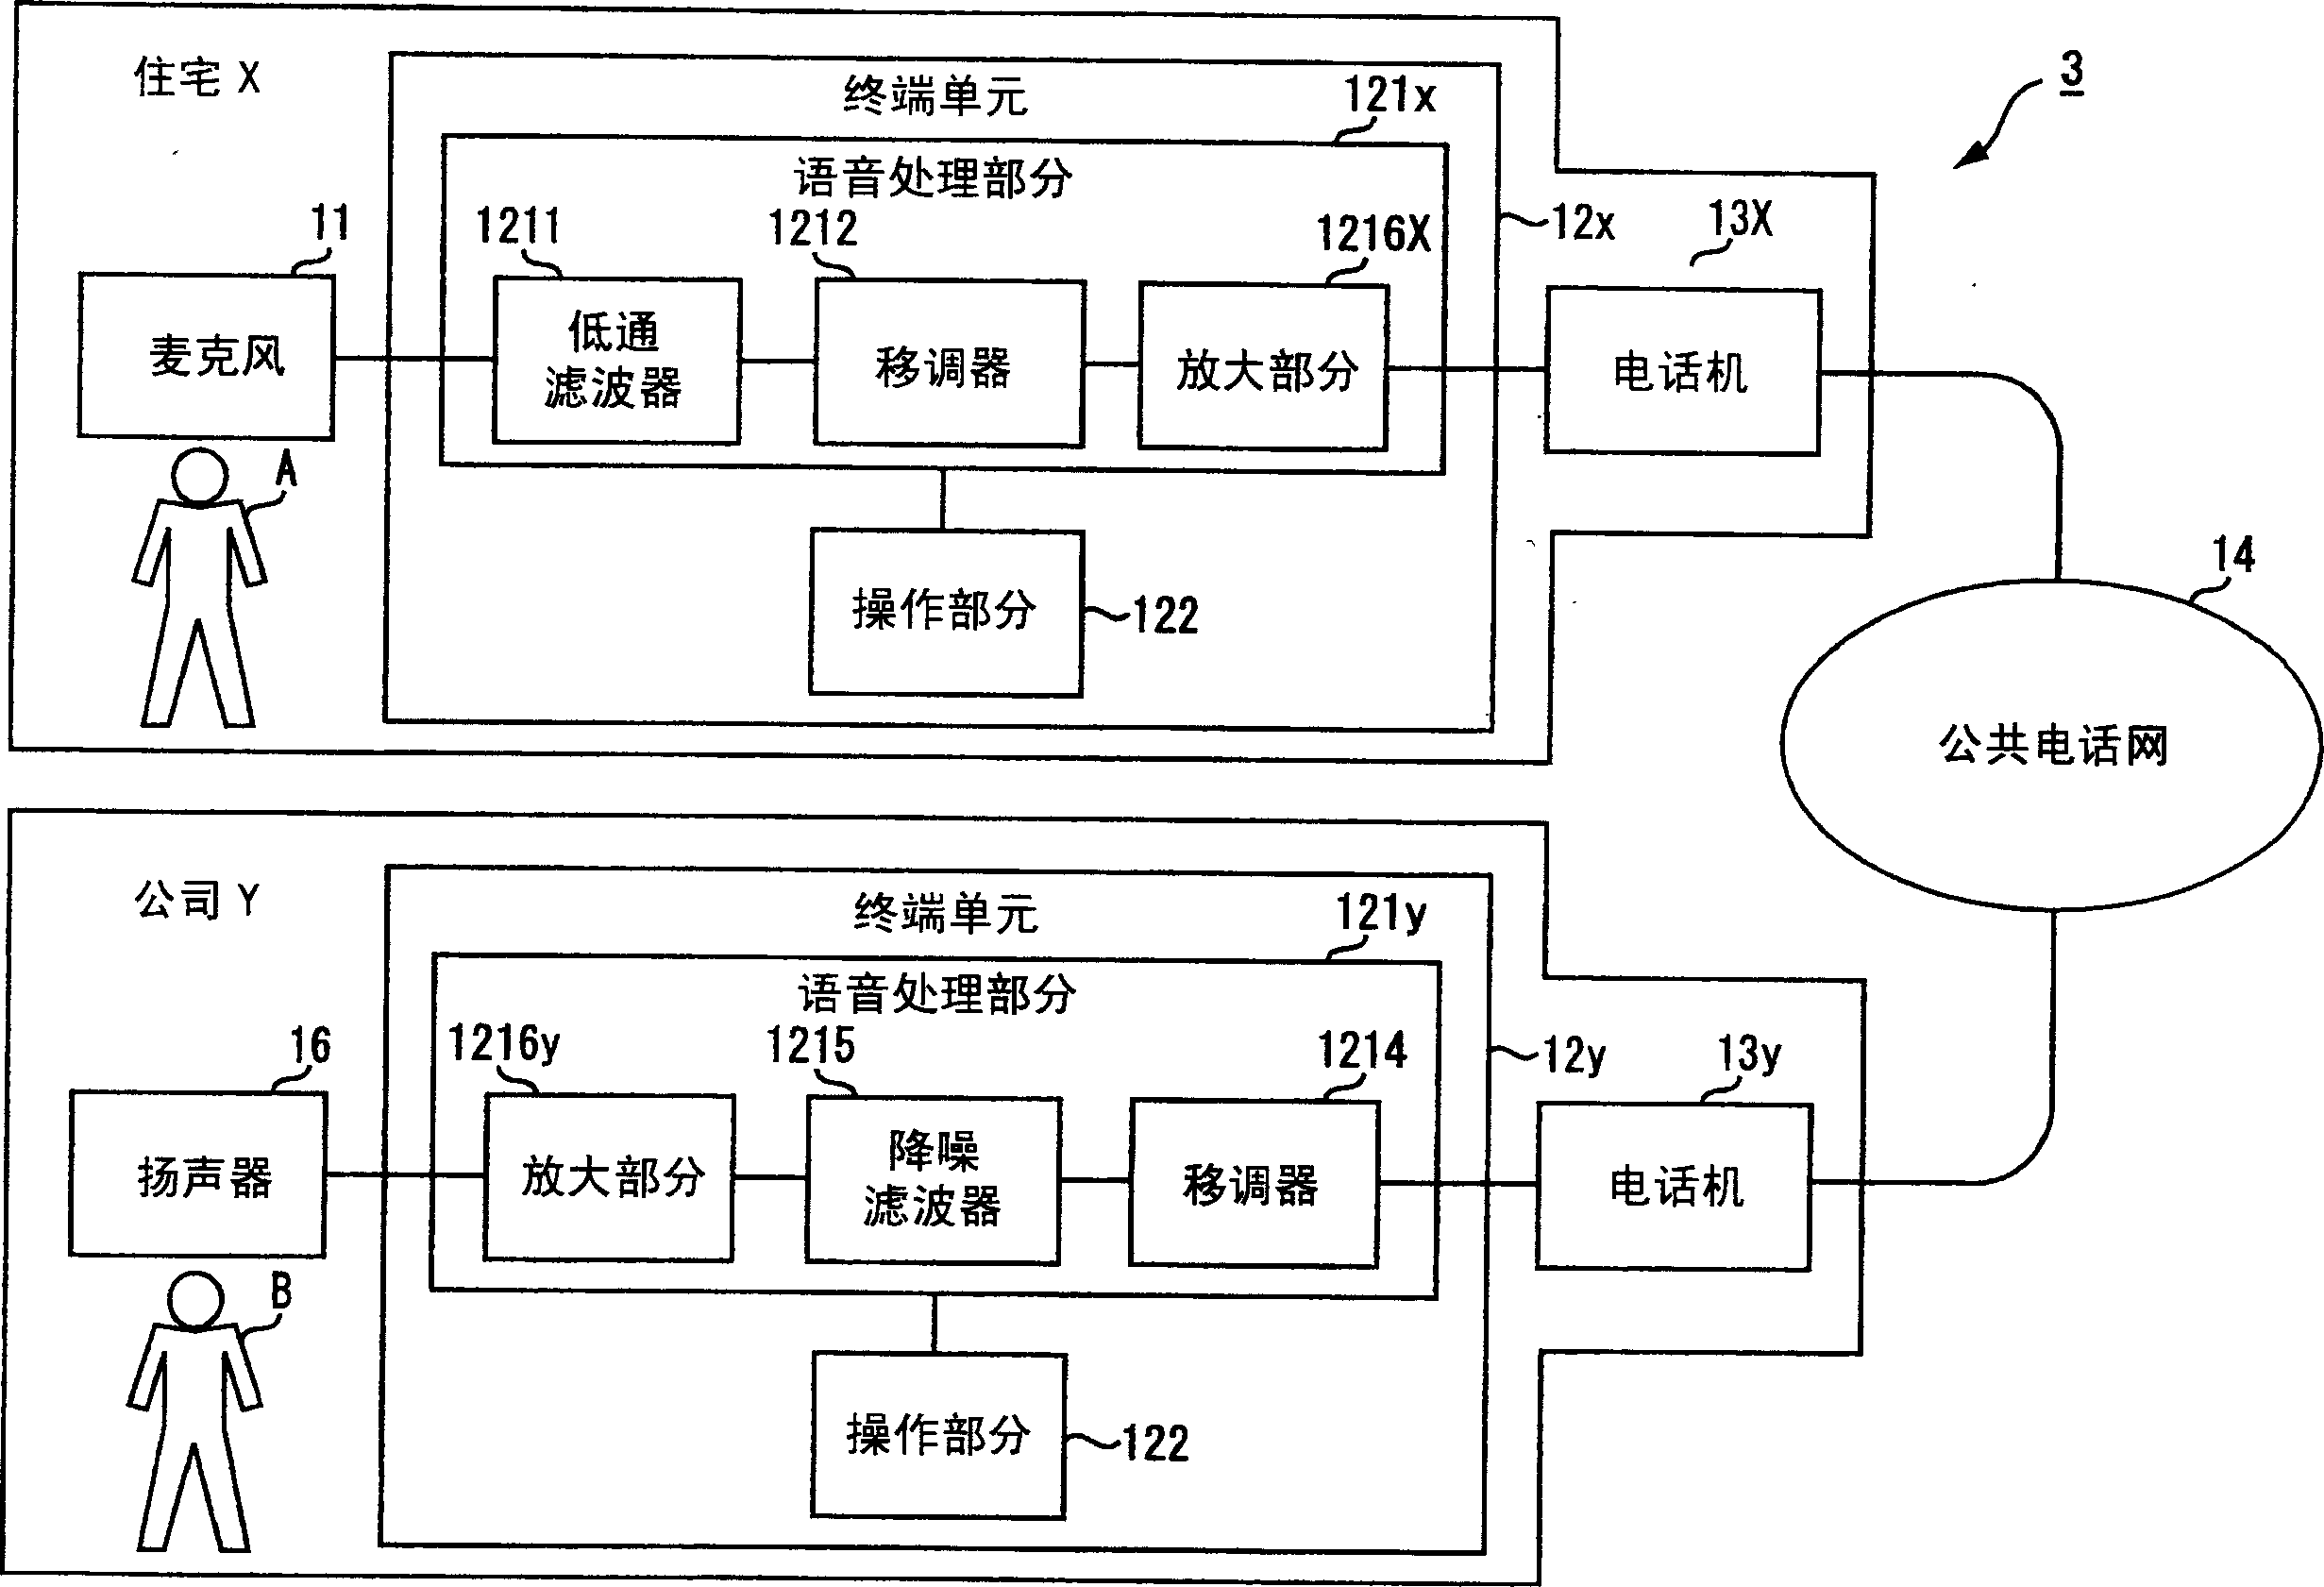 Communication system for remote sound monitoring with ambiguous signal processing